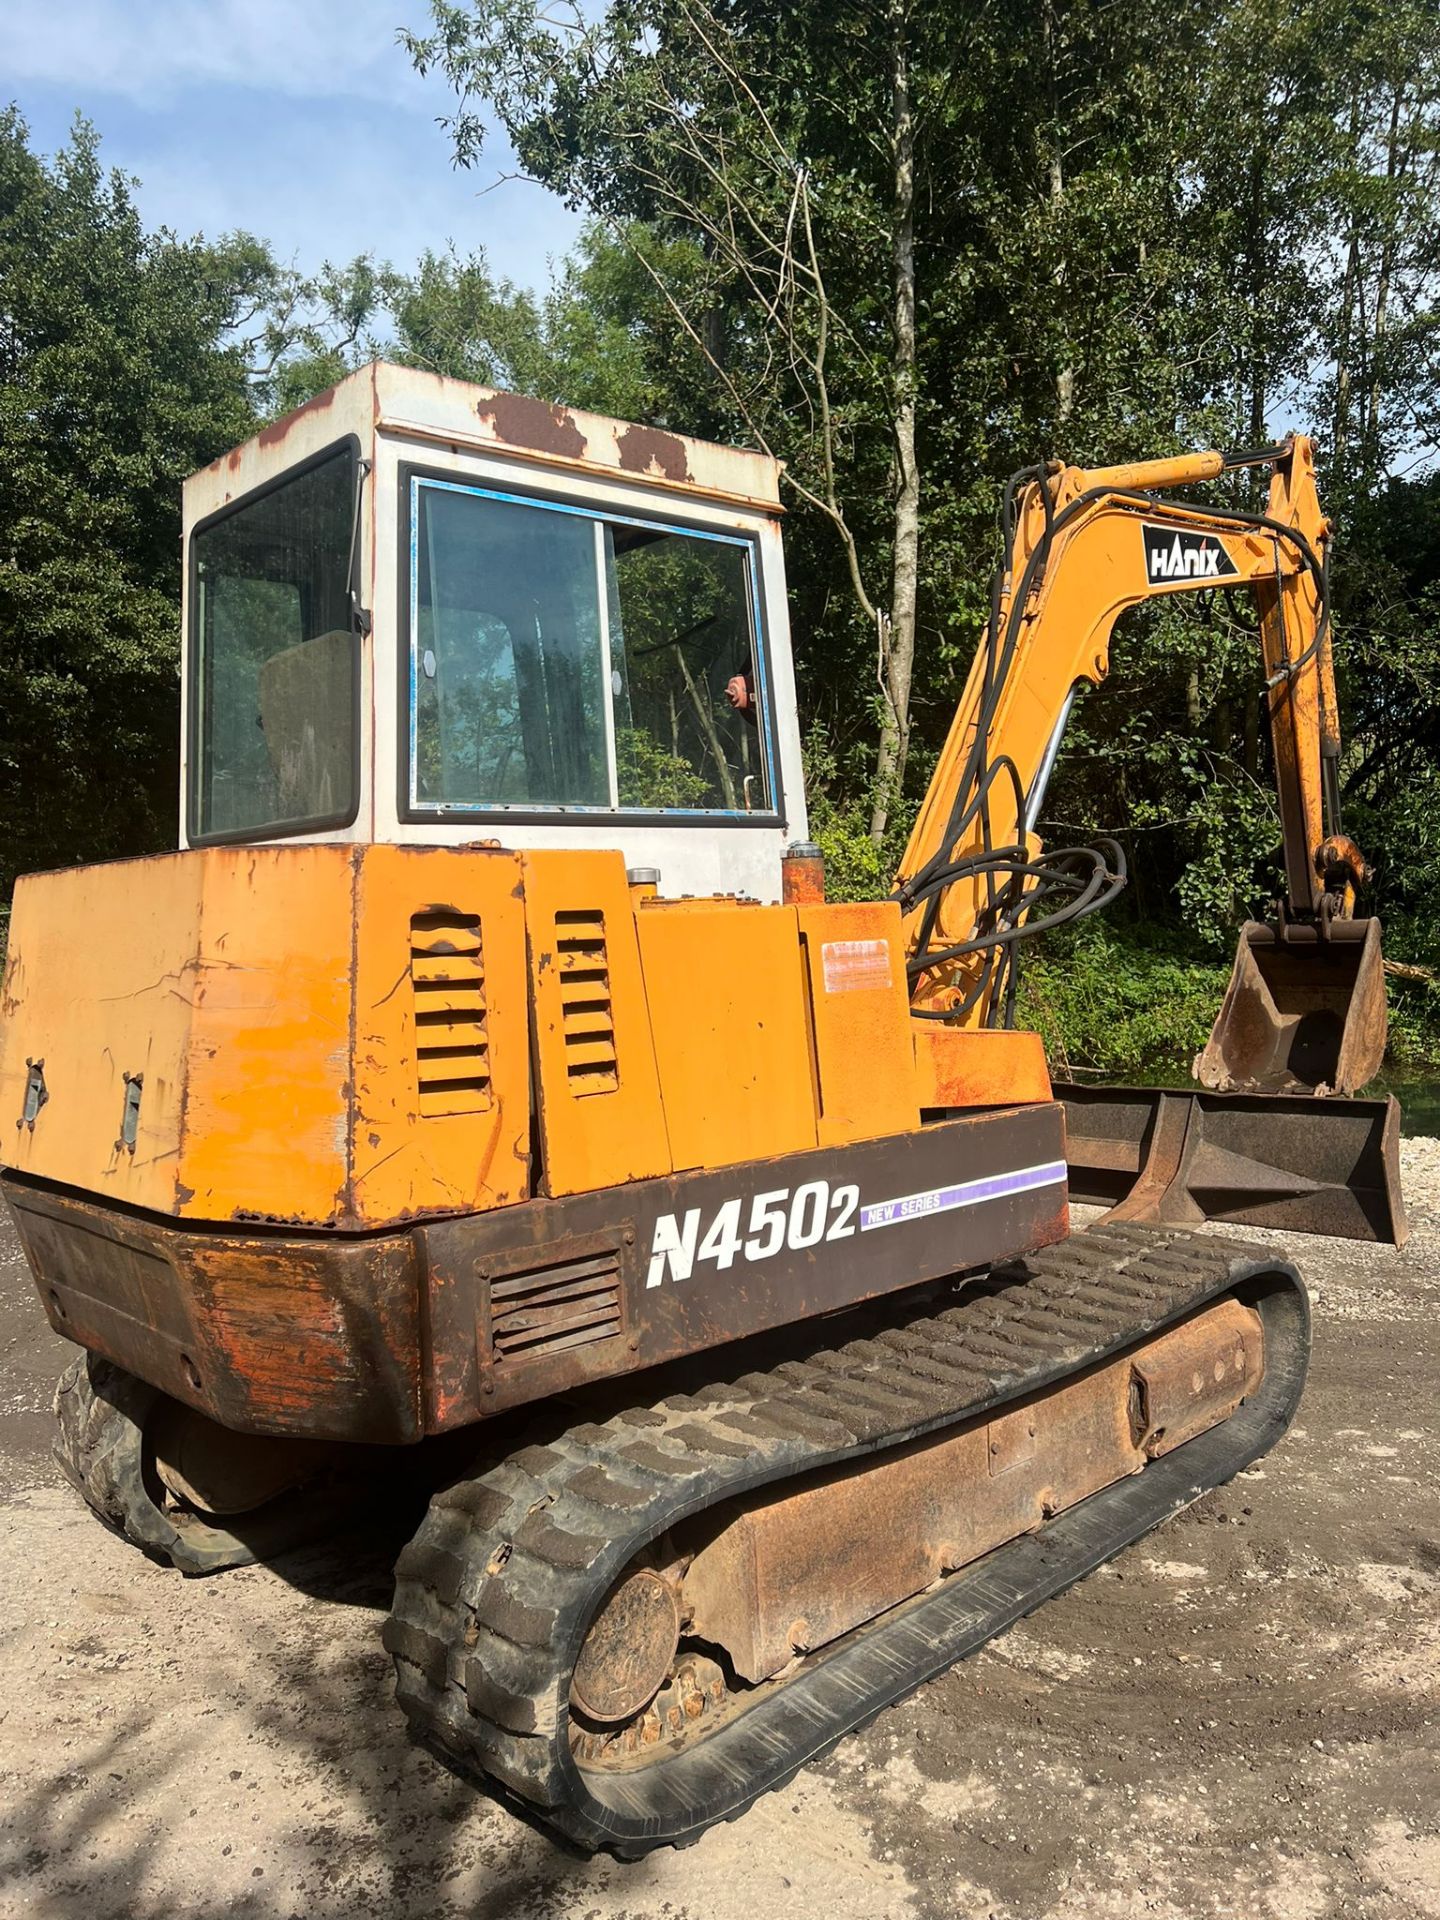 HANIX N450-2 tracked excavator 4.5 TON - RUNS DRIVES AND DIGS *PLUS VAT* - Image 5 of 8